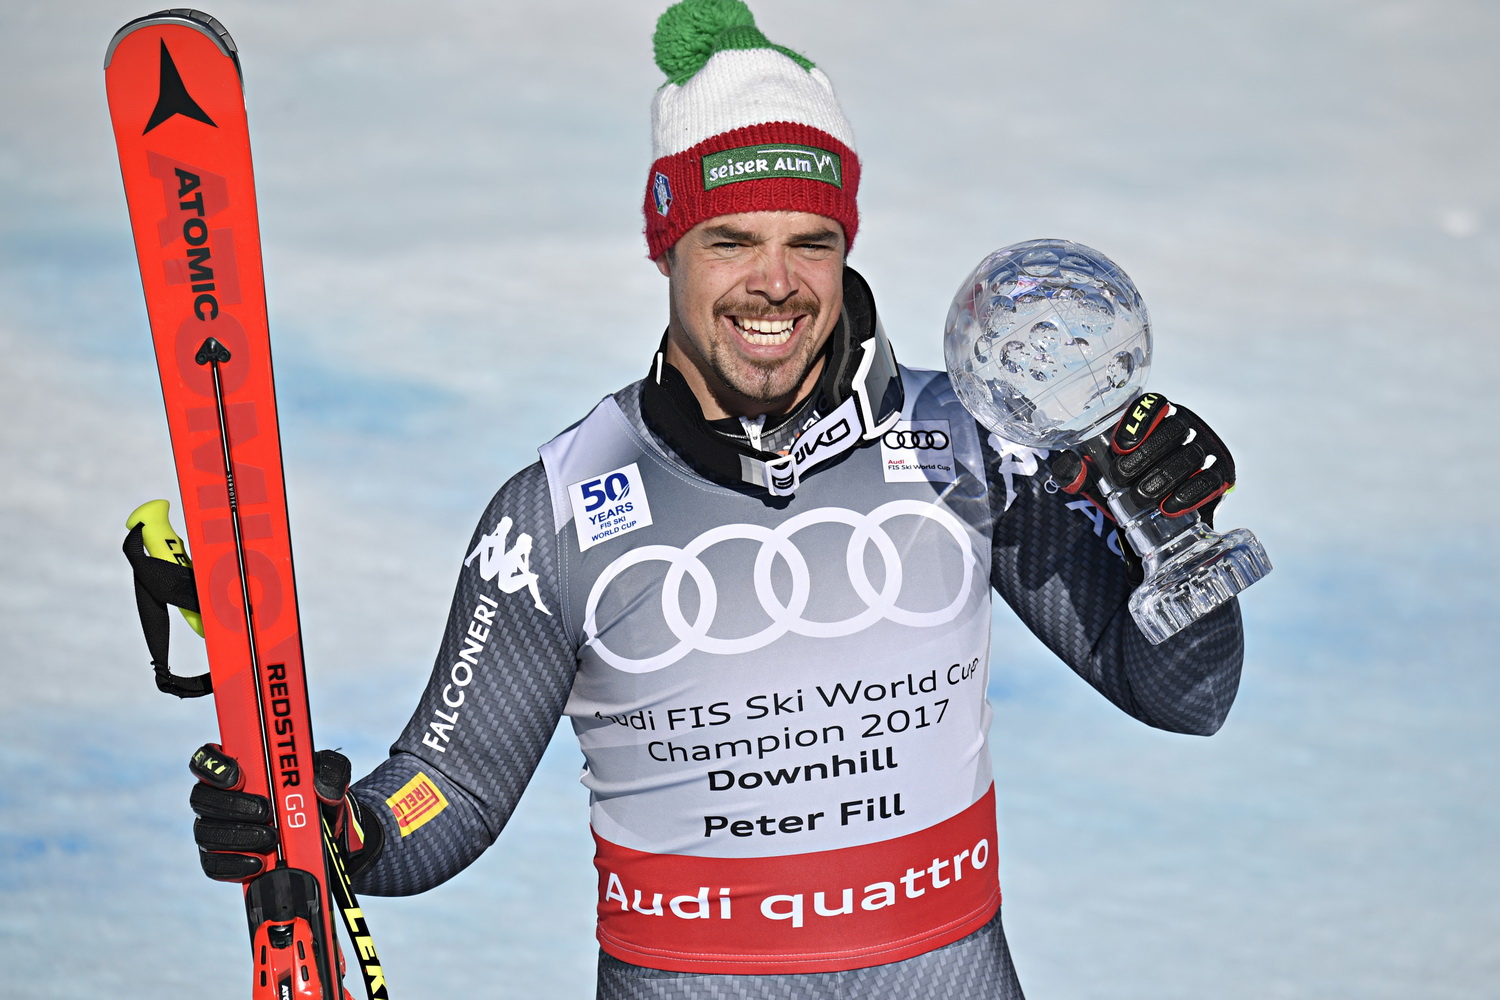 ASPEN, USA - MARCH 15: Peter Fill of Italy wins the globe in the overall standings during the Audi FIS Alpine Ski World Cup Finals Women's and Men's Downhill on March 15, 2017 in Aspen, USA (Photo by Francis Bompard/Agence Zoom)